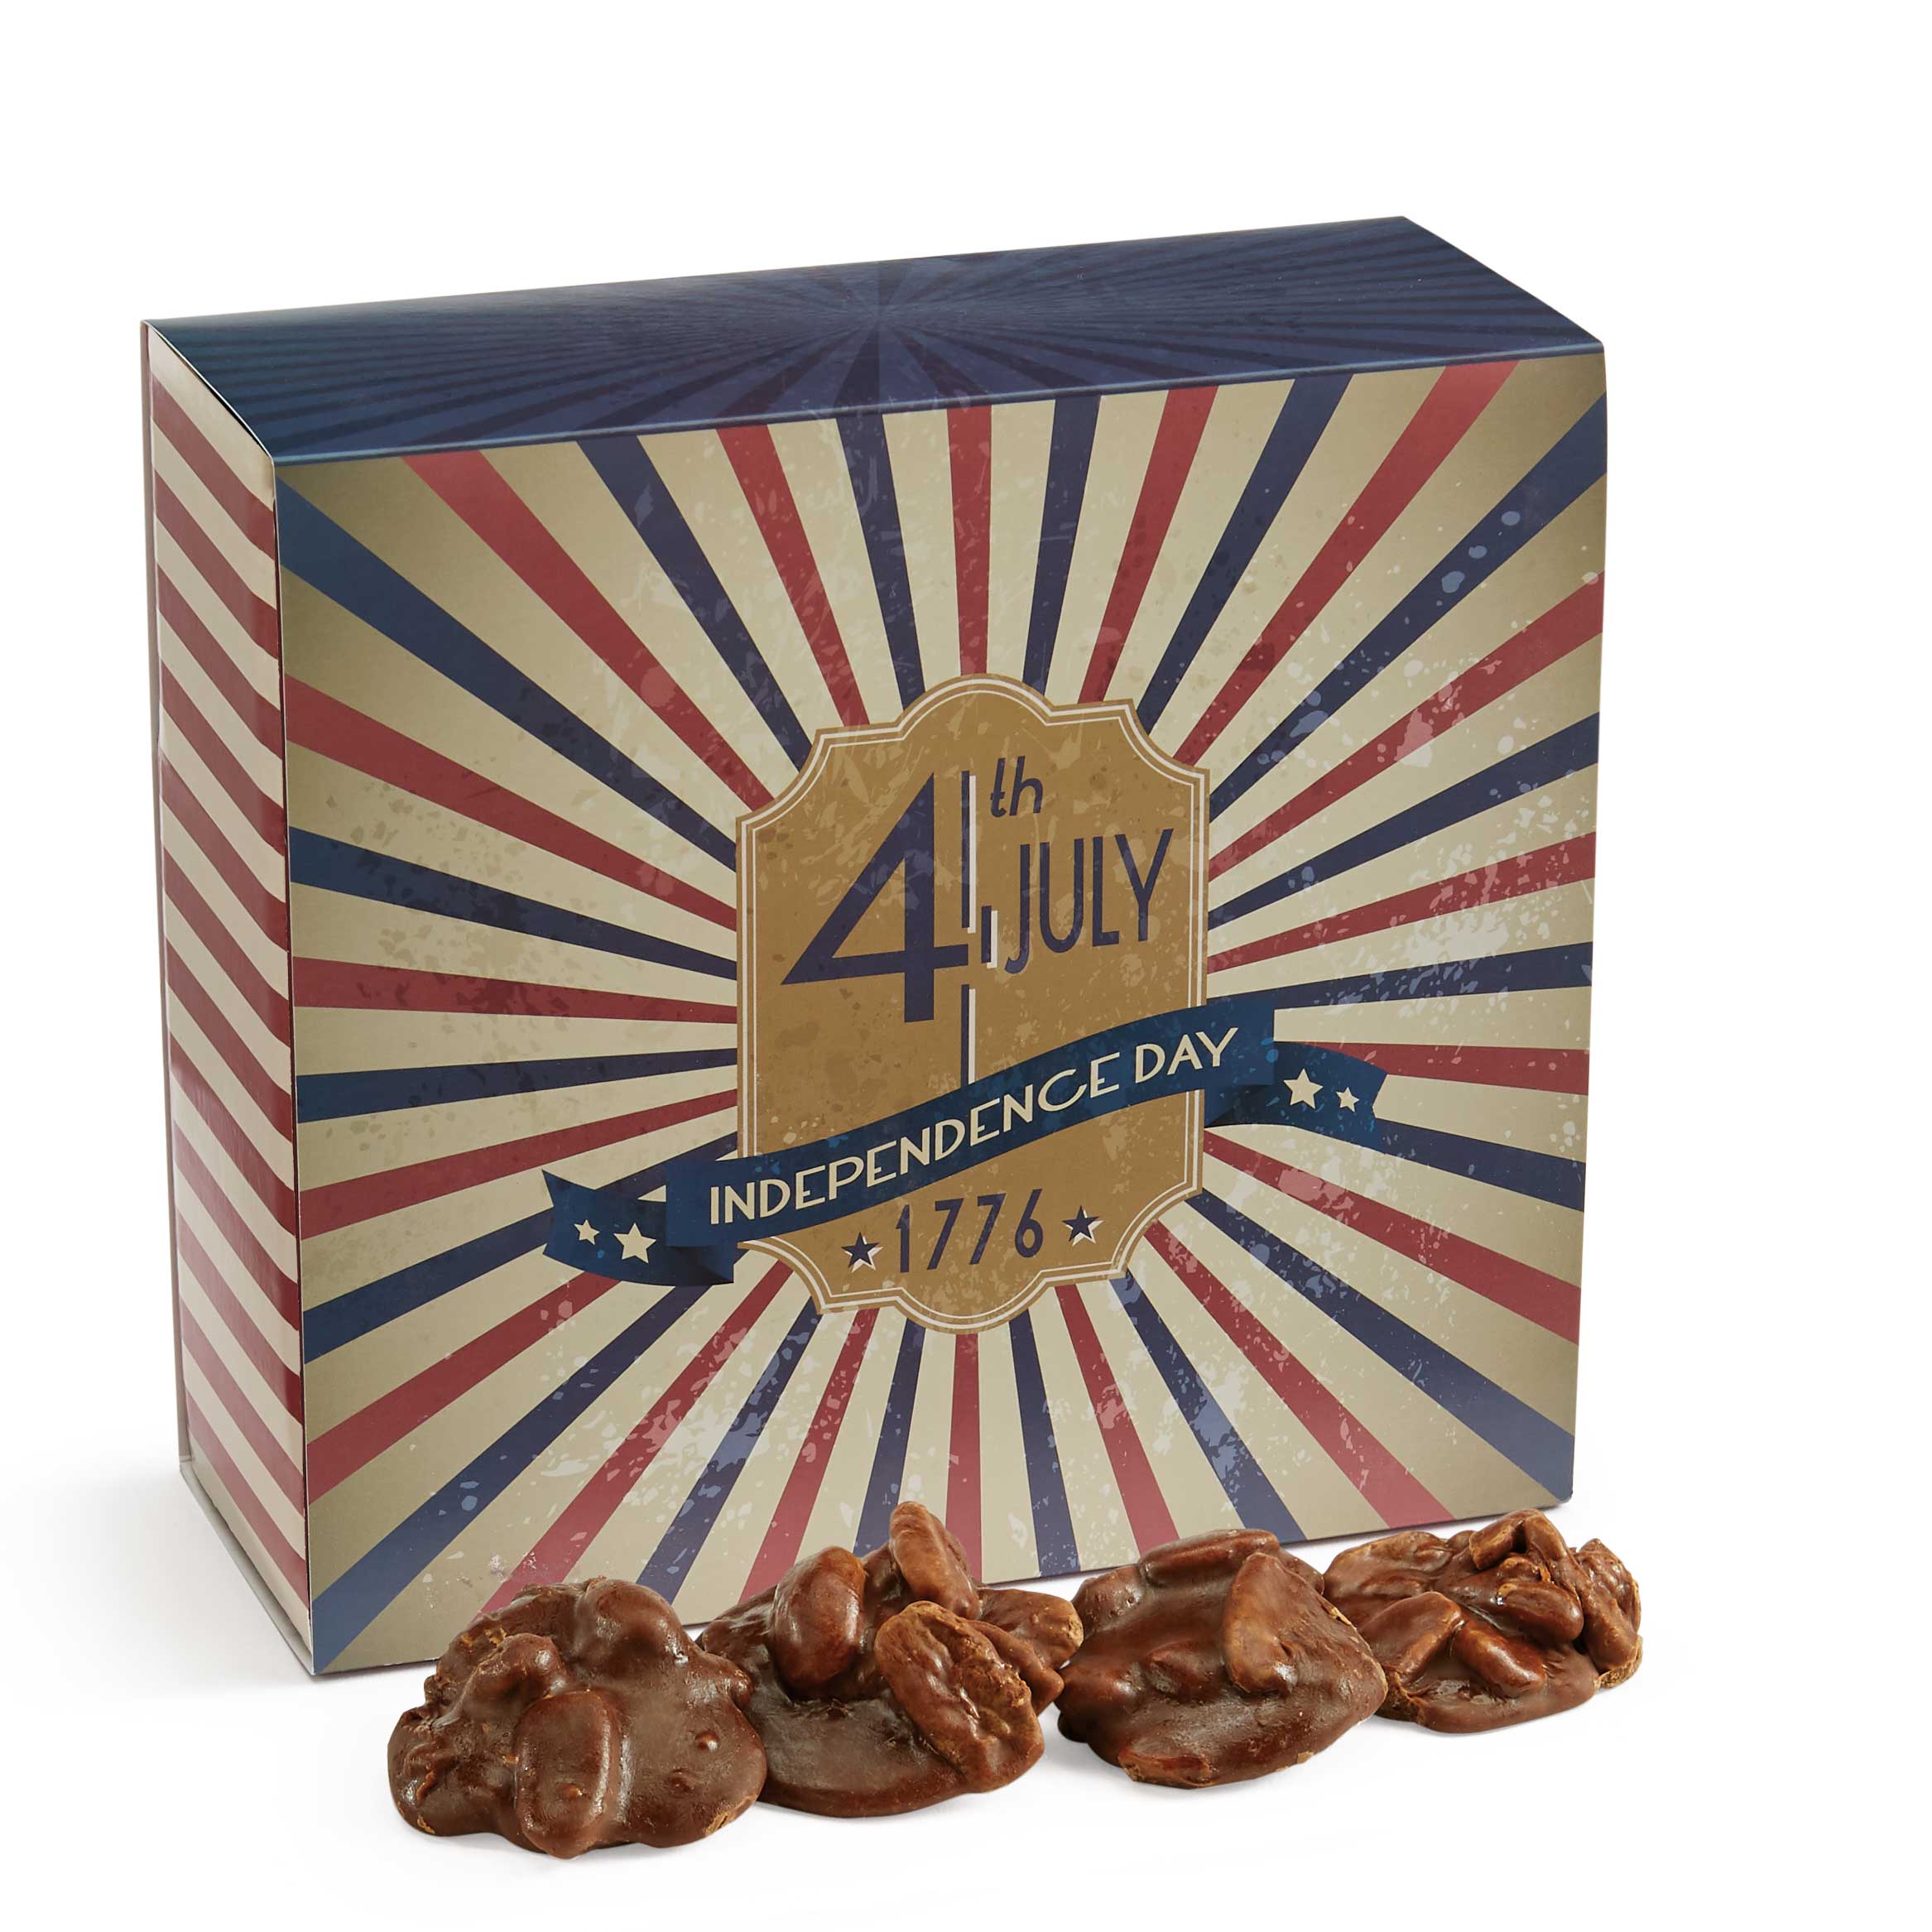 Product Image for 24 Piece Chocolate Pralines in the 4th of July Gift Box